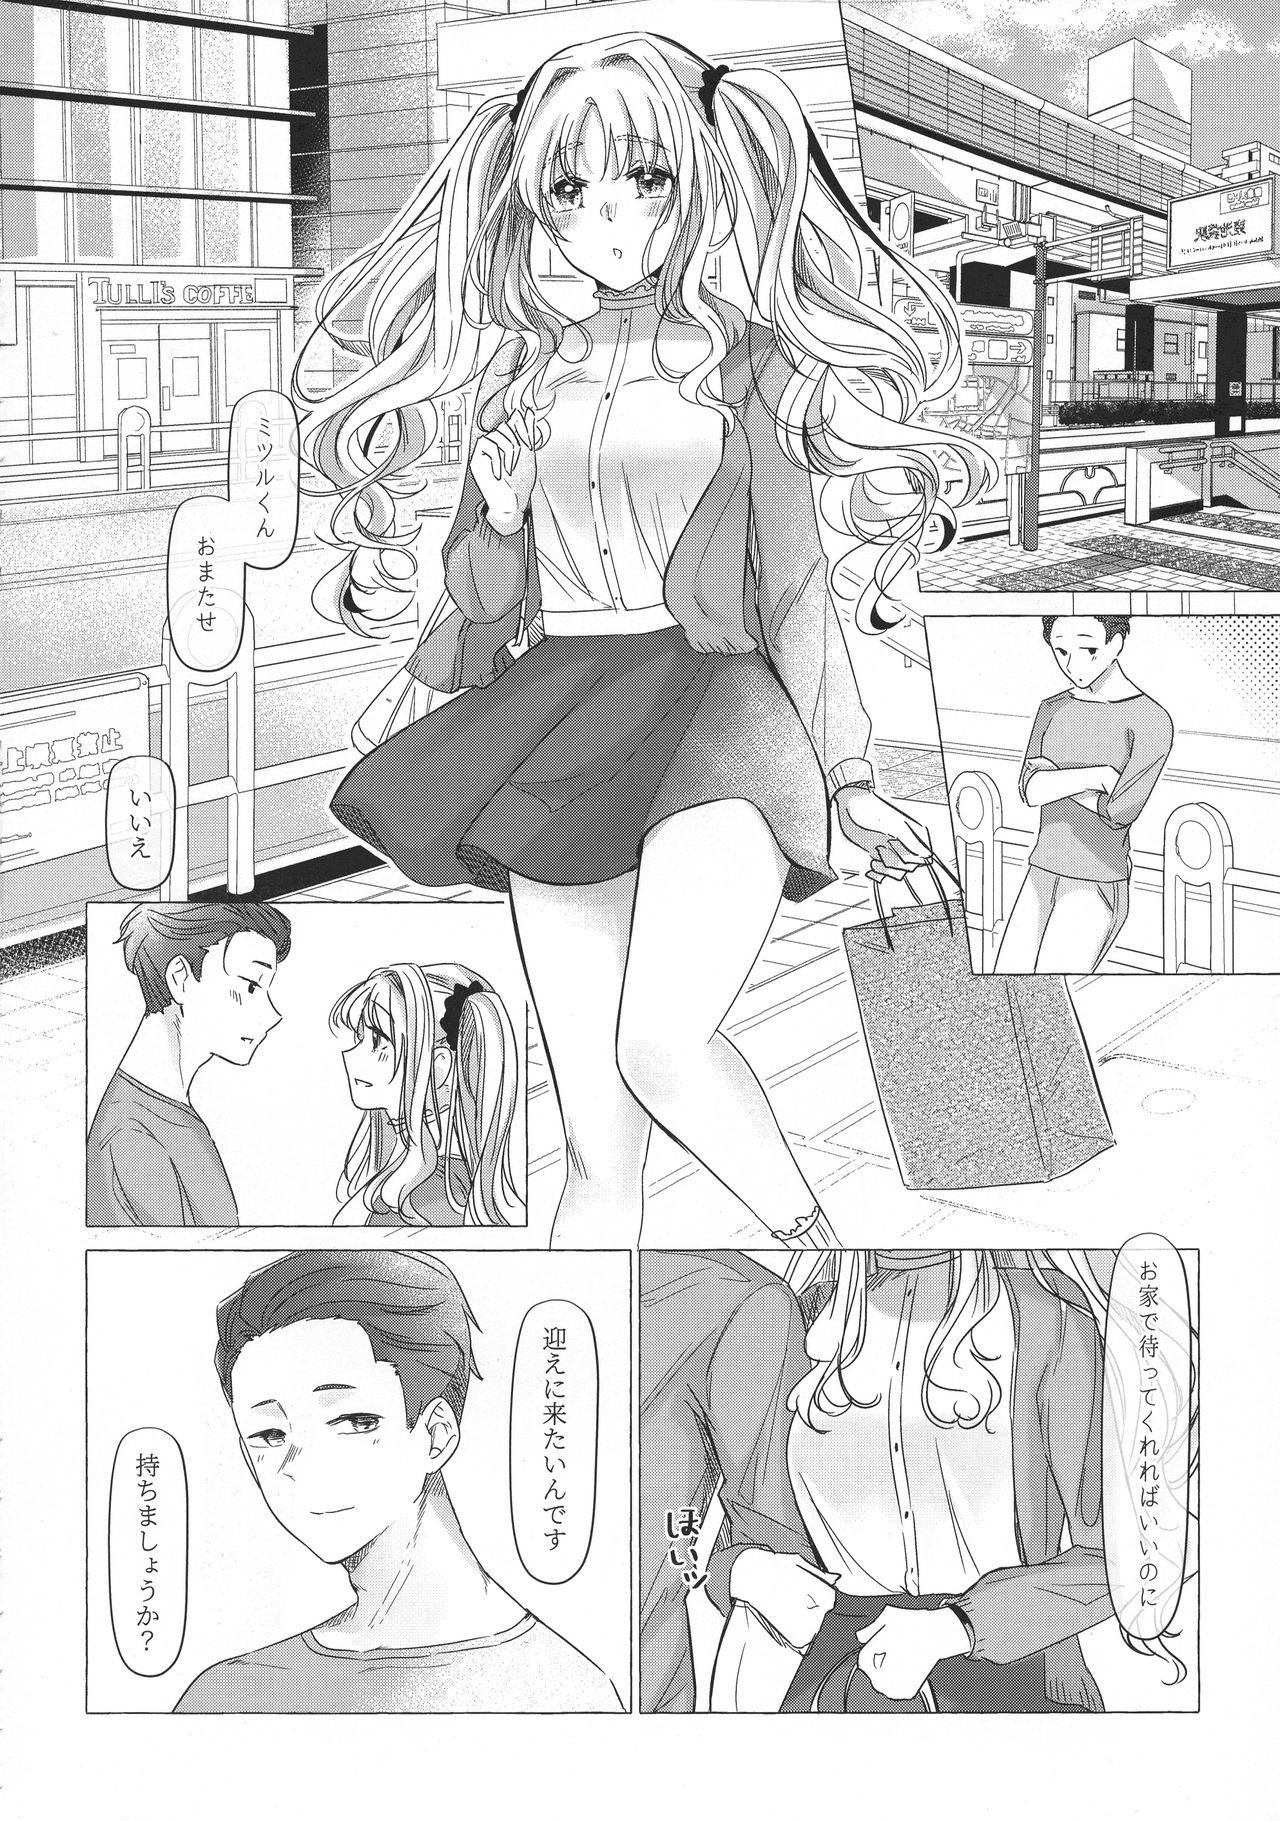 Hot Couple Sex 満心総意の躾 - Darling in the franxx Cumming - Page 9